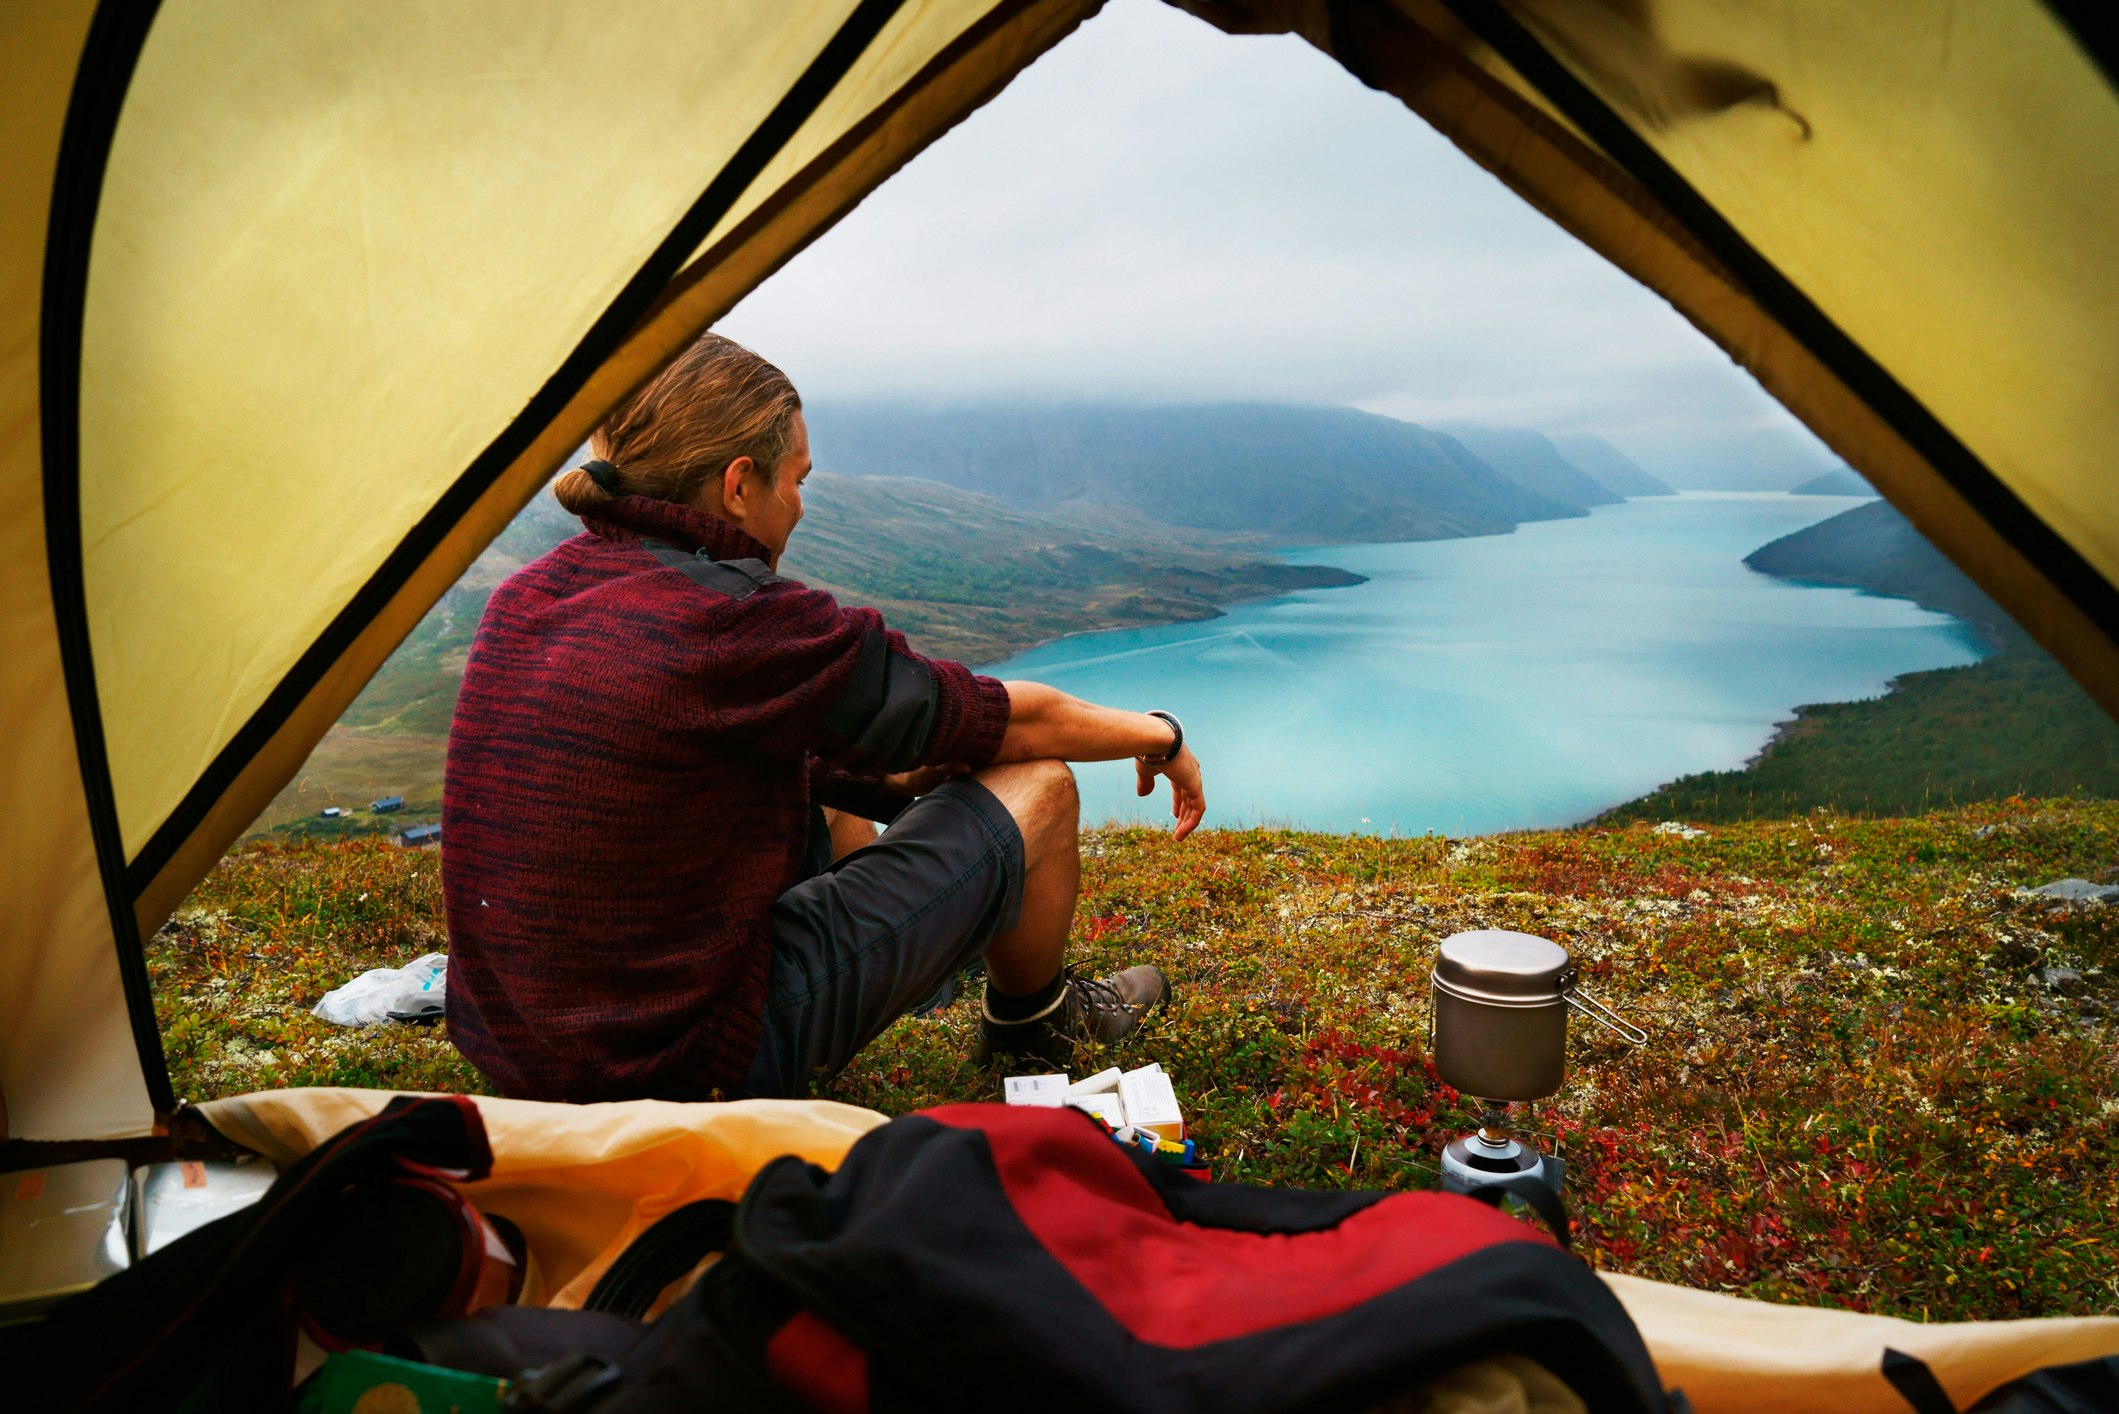 A young hiker sits outside his tent on a grassy spot overlooking Lake Gjende, Jotunheimen National Park, Norway.